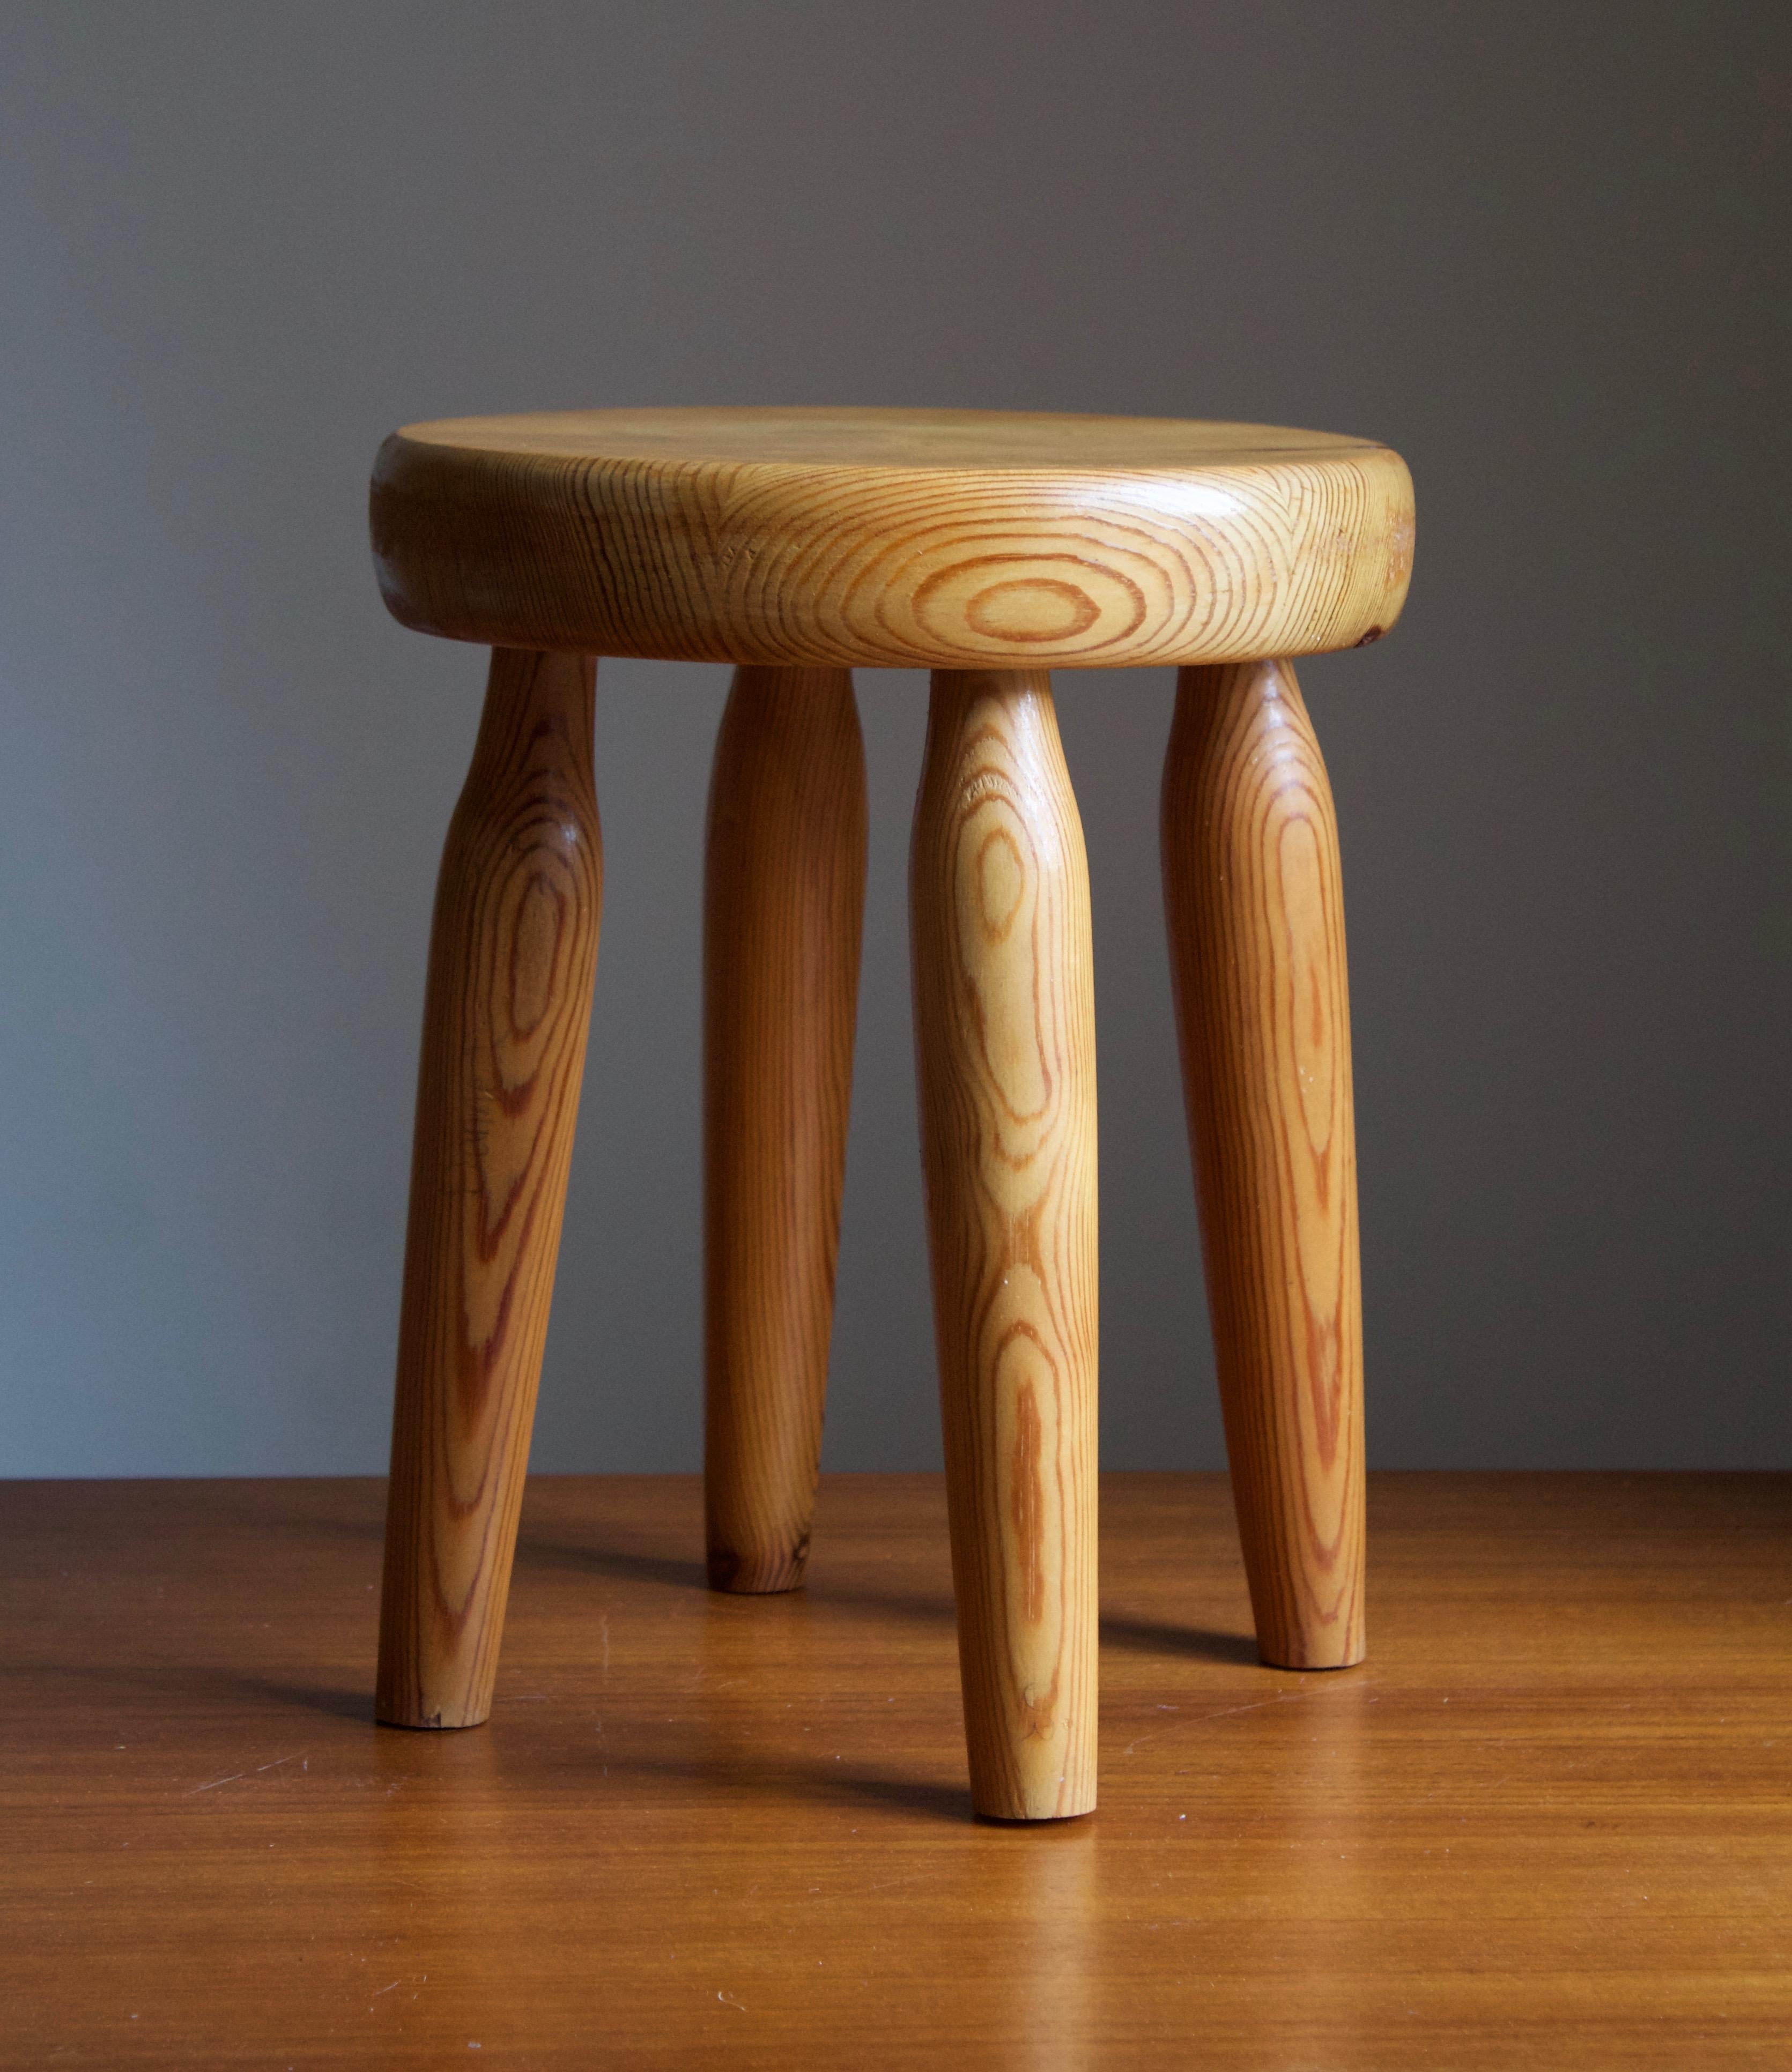 A small Swedish pinewood stool or side table. By unknown designer, 1970s.

Other designers of the period include Pierre Chapo, Charlotte Perriand, Axel Einar Hjorth, and Kaare Klint.





 